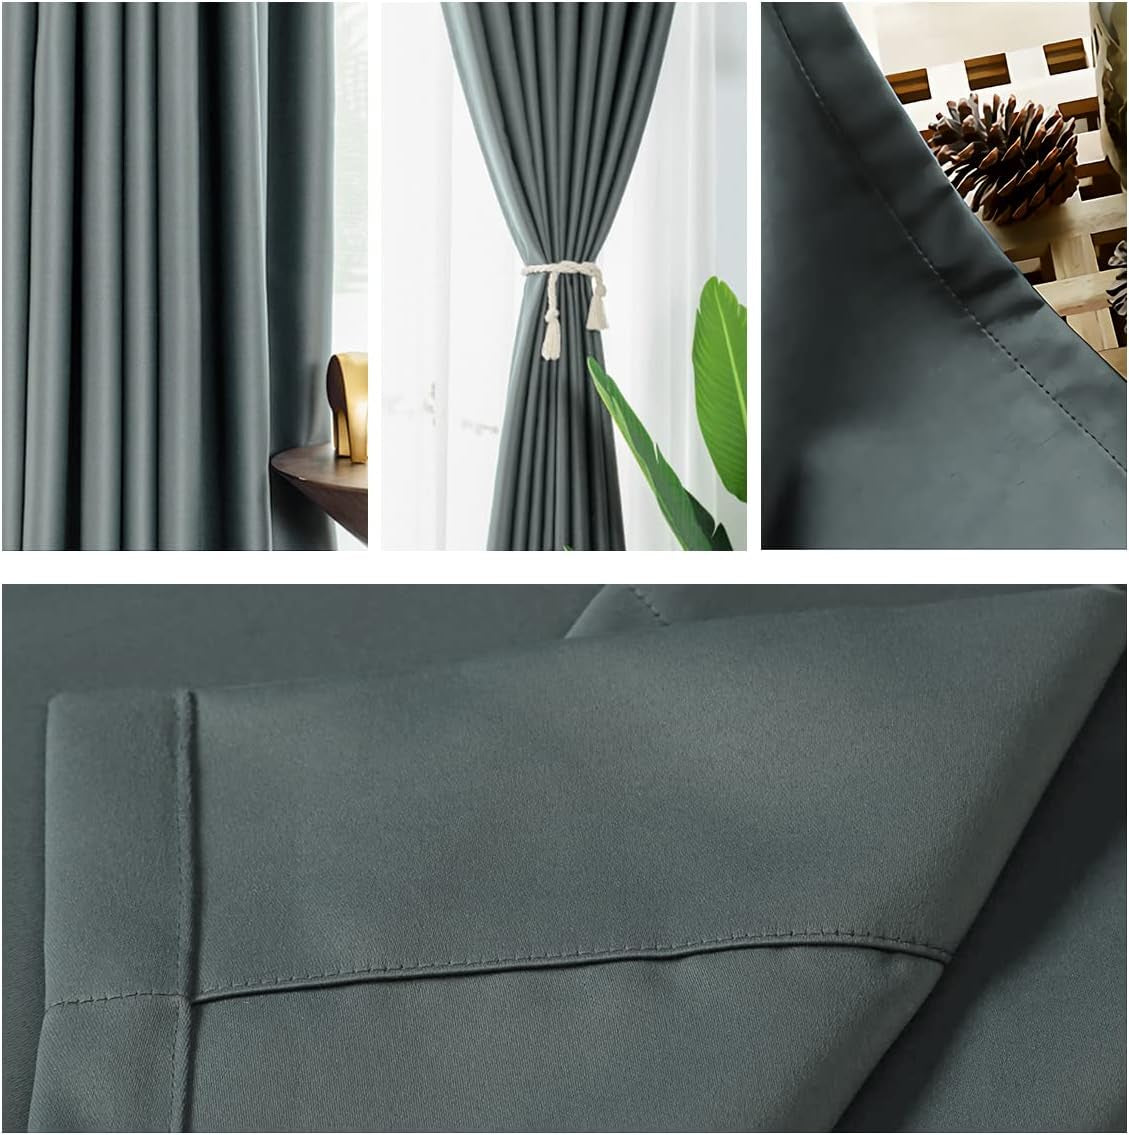 IYUEGO Pinch Pleat Solid Thermal Insulated 95% Greyout Patio Door Curtain Panel Drape for Traverse Rod and Track, Grey 52" W X 96" L (One Panel)  I Love Curtains   